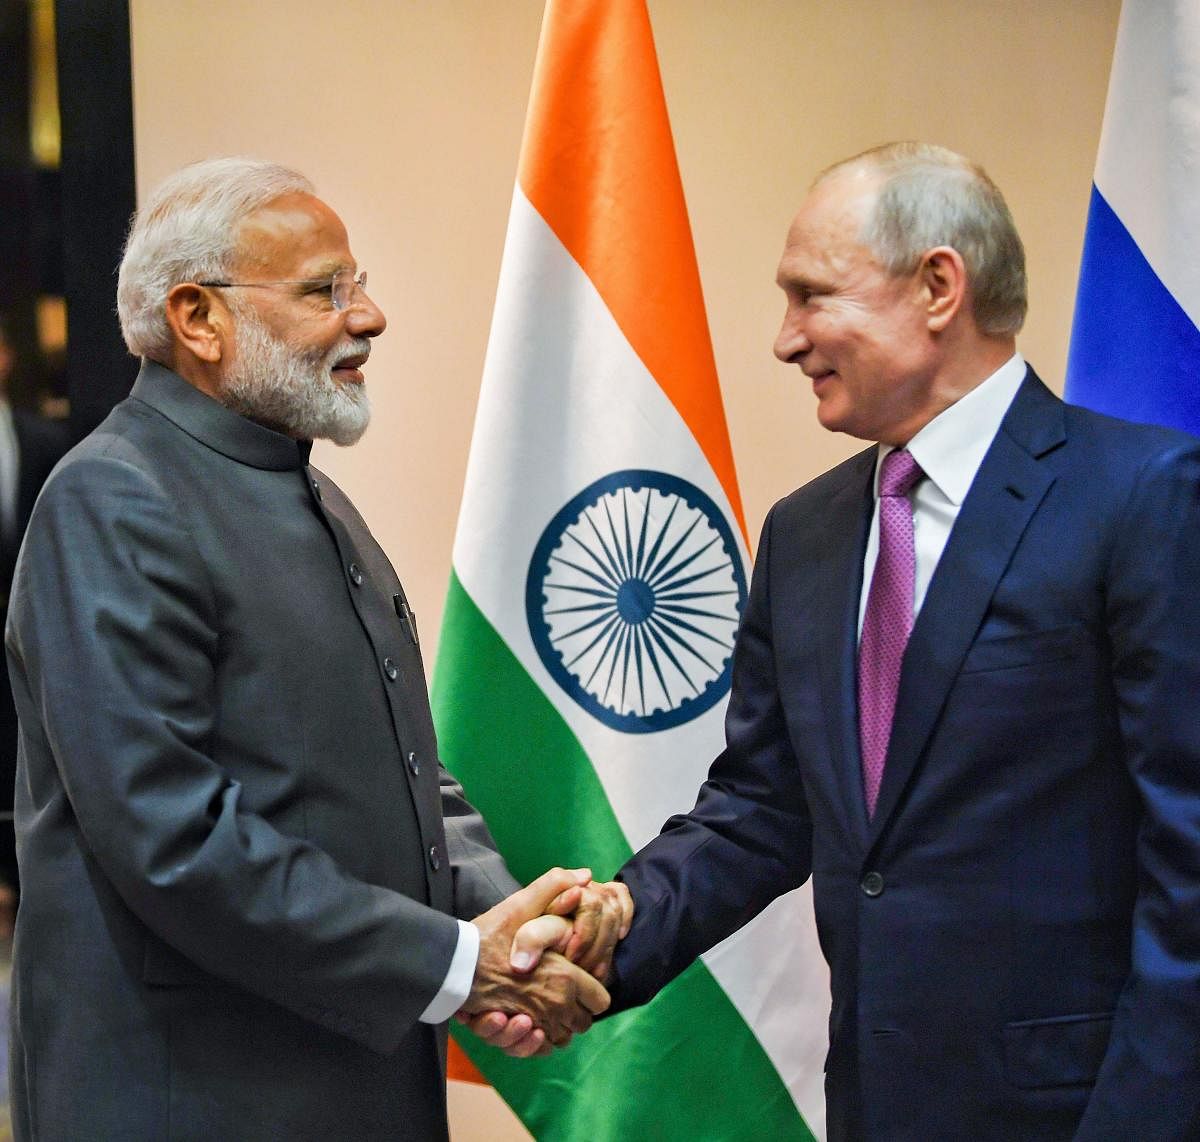 Narendra Modi shakes hands with Russian President Vladimir Putin during a meeting on the sidelines of the Shanghai Cooperation Organisation (SCO) Summit in Bishkek. (PTI Photo)